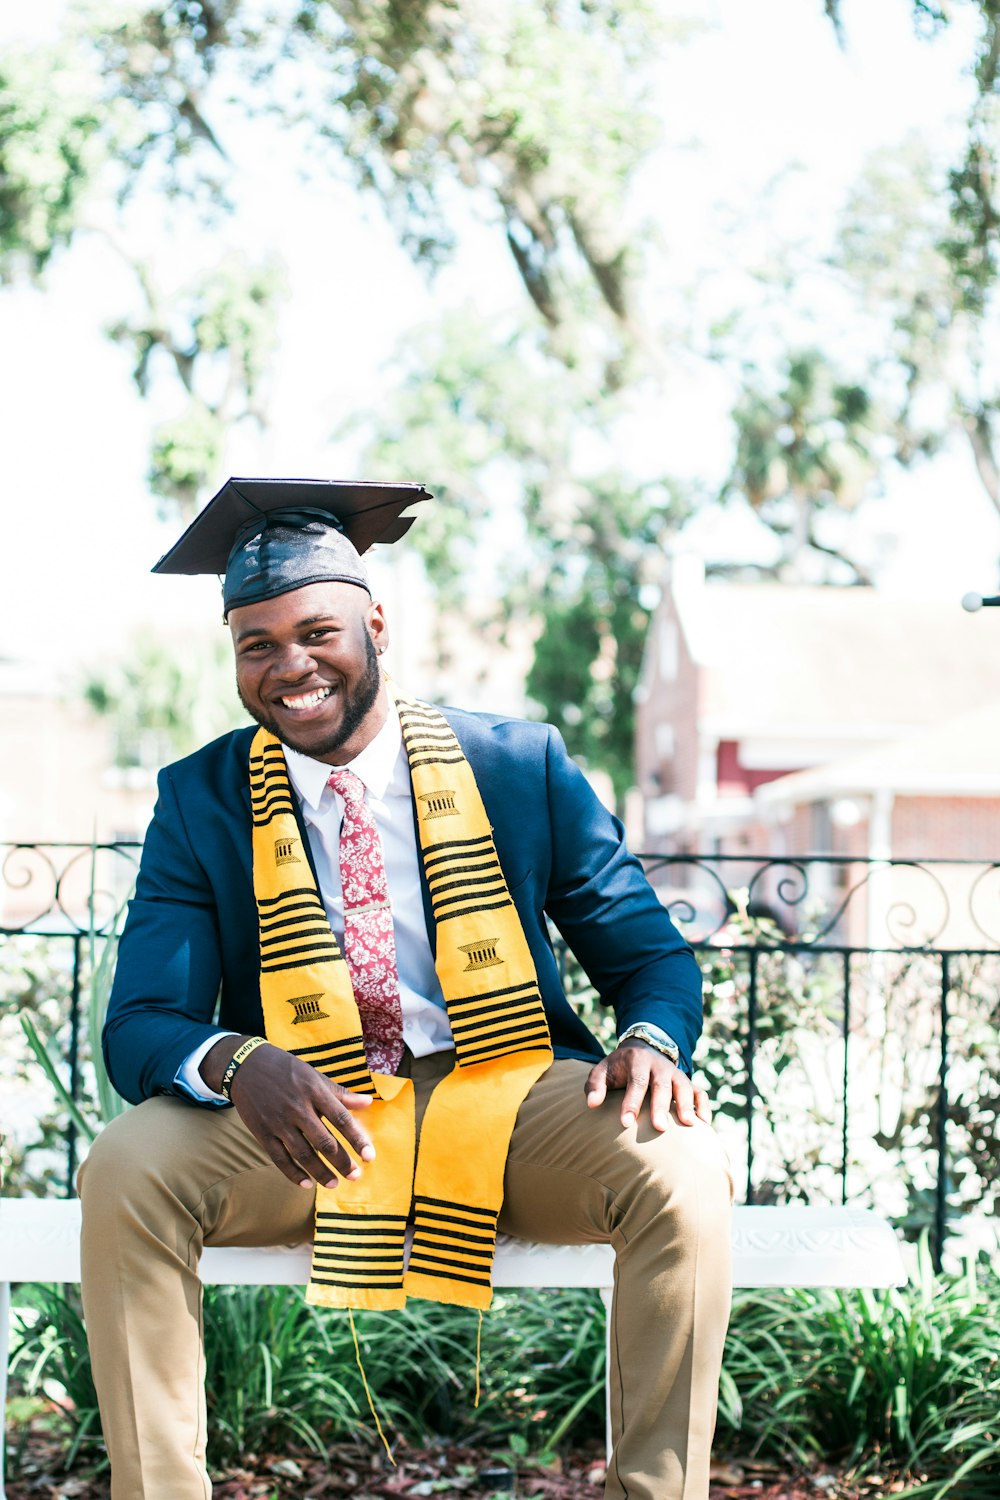 A smiling man in a graduation attire is sitting on a bench in a garden.